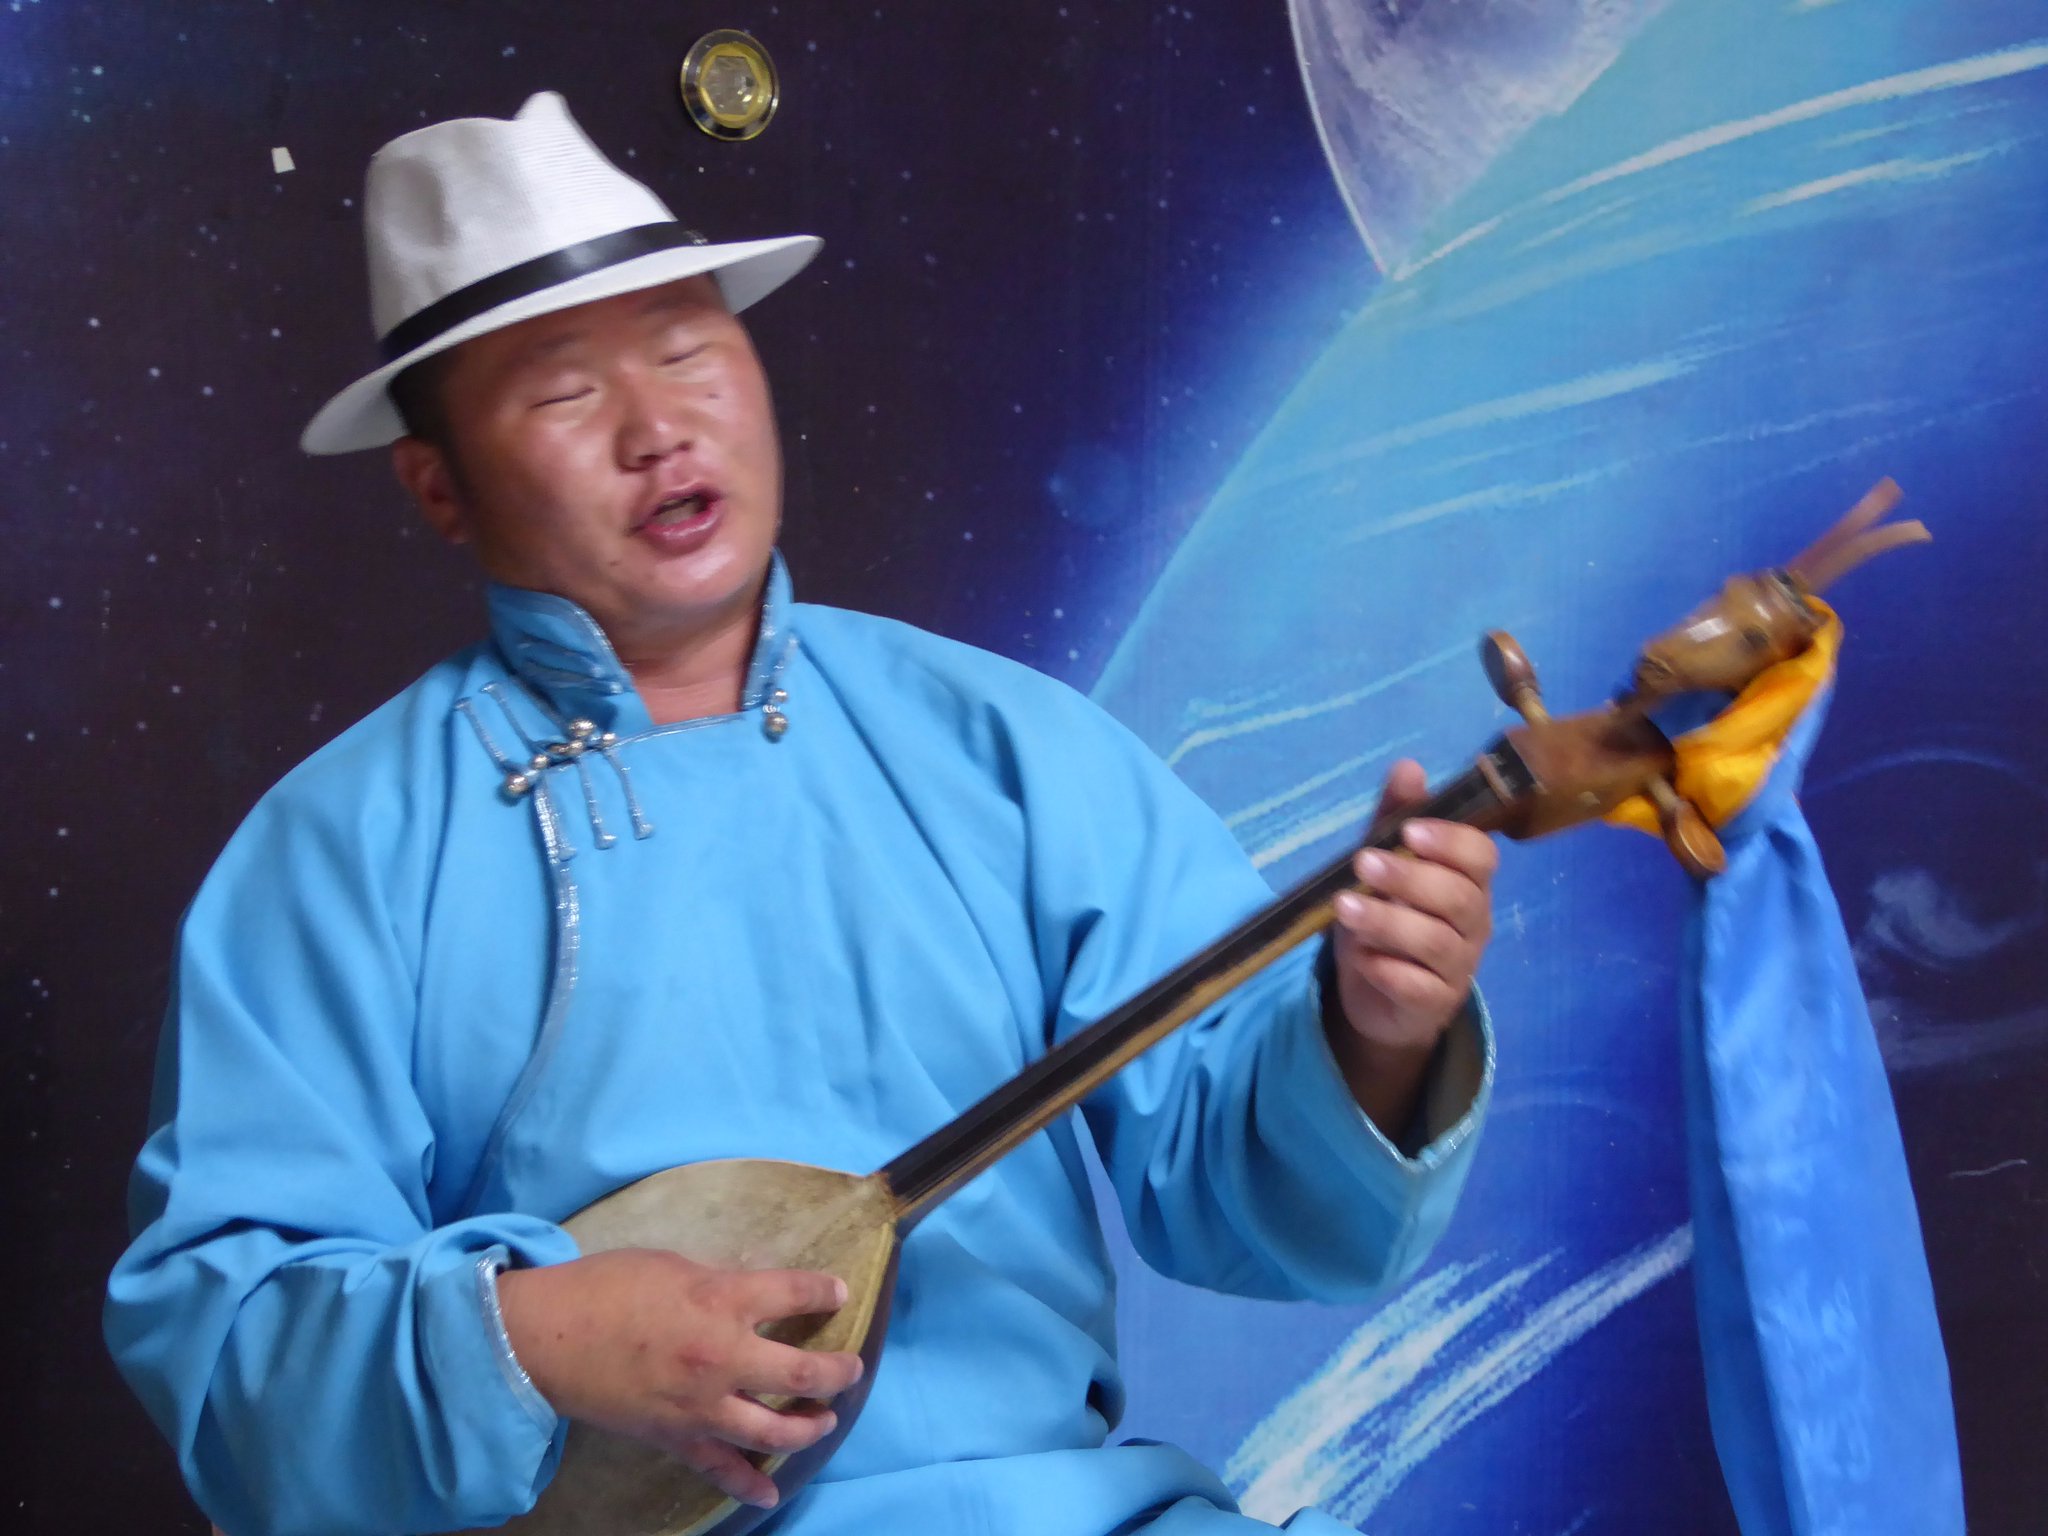 This is Erdeneochir - a talented Mongolian musician. His musical skills include the art of khoomi (throat singing) and playing the horse head fiddle.